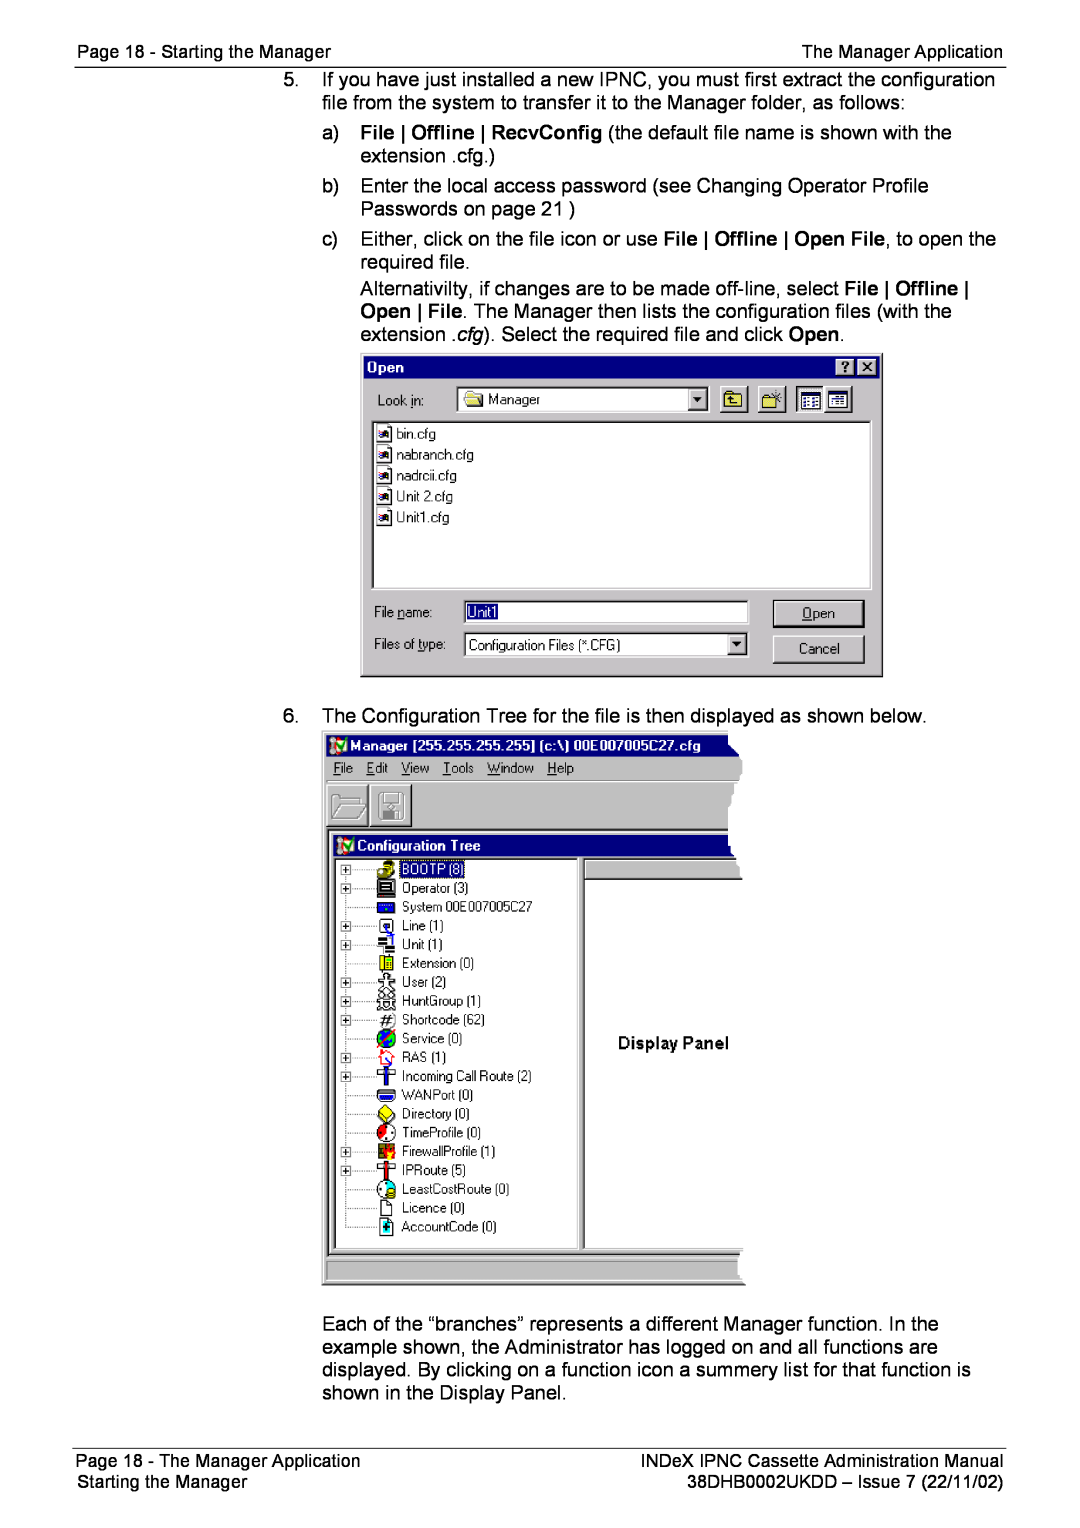 Avaya 38DHB0002UKDD manual Page 18 - Starting the Manager, Page 18 - The Manager Application 